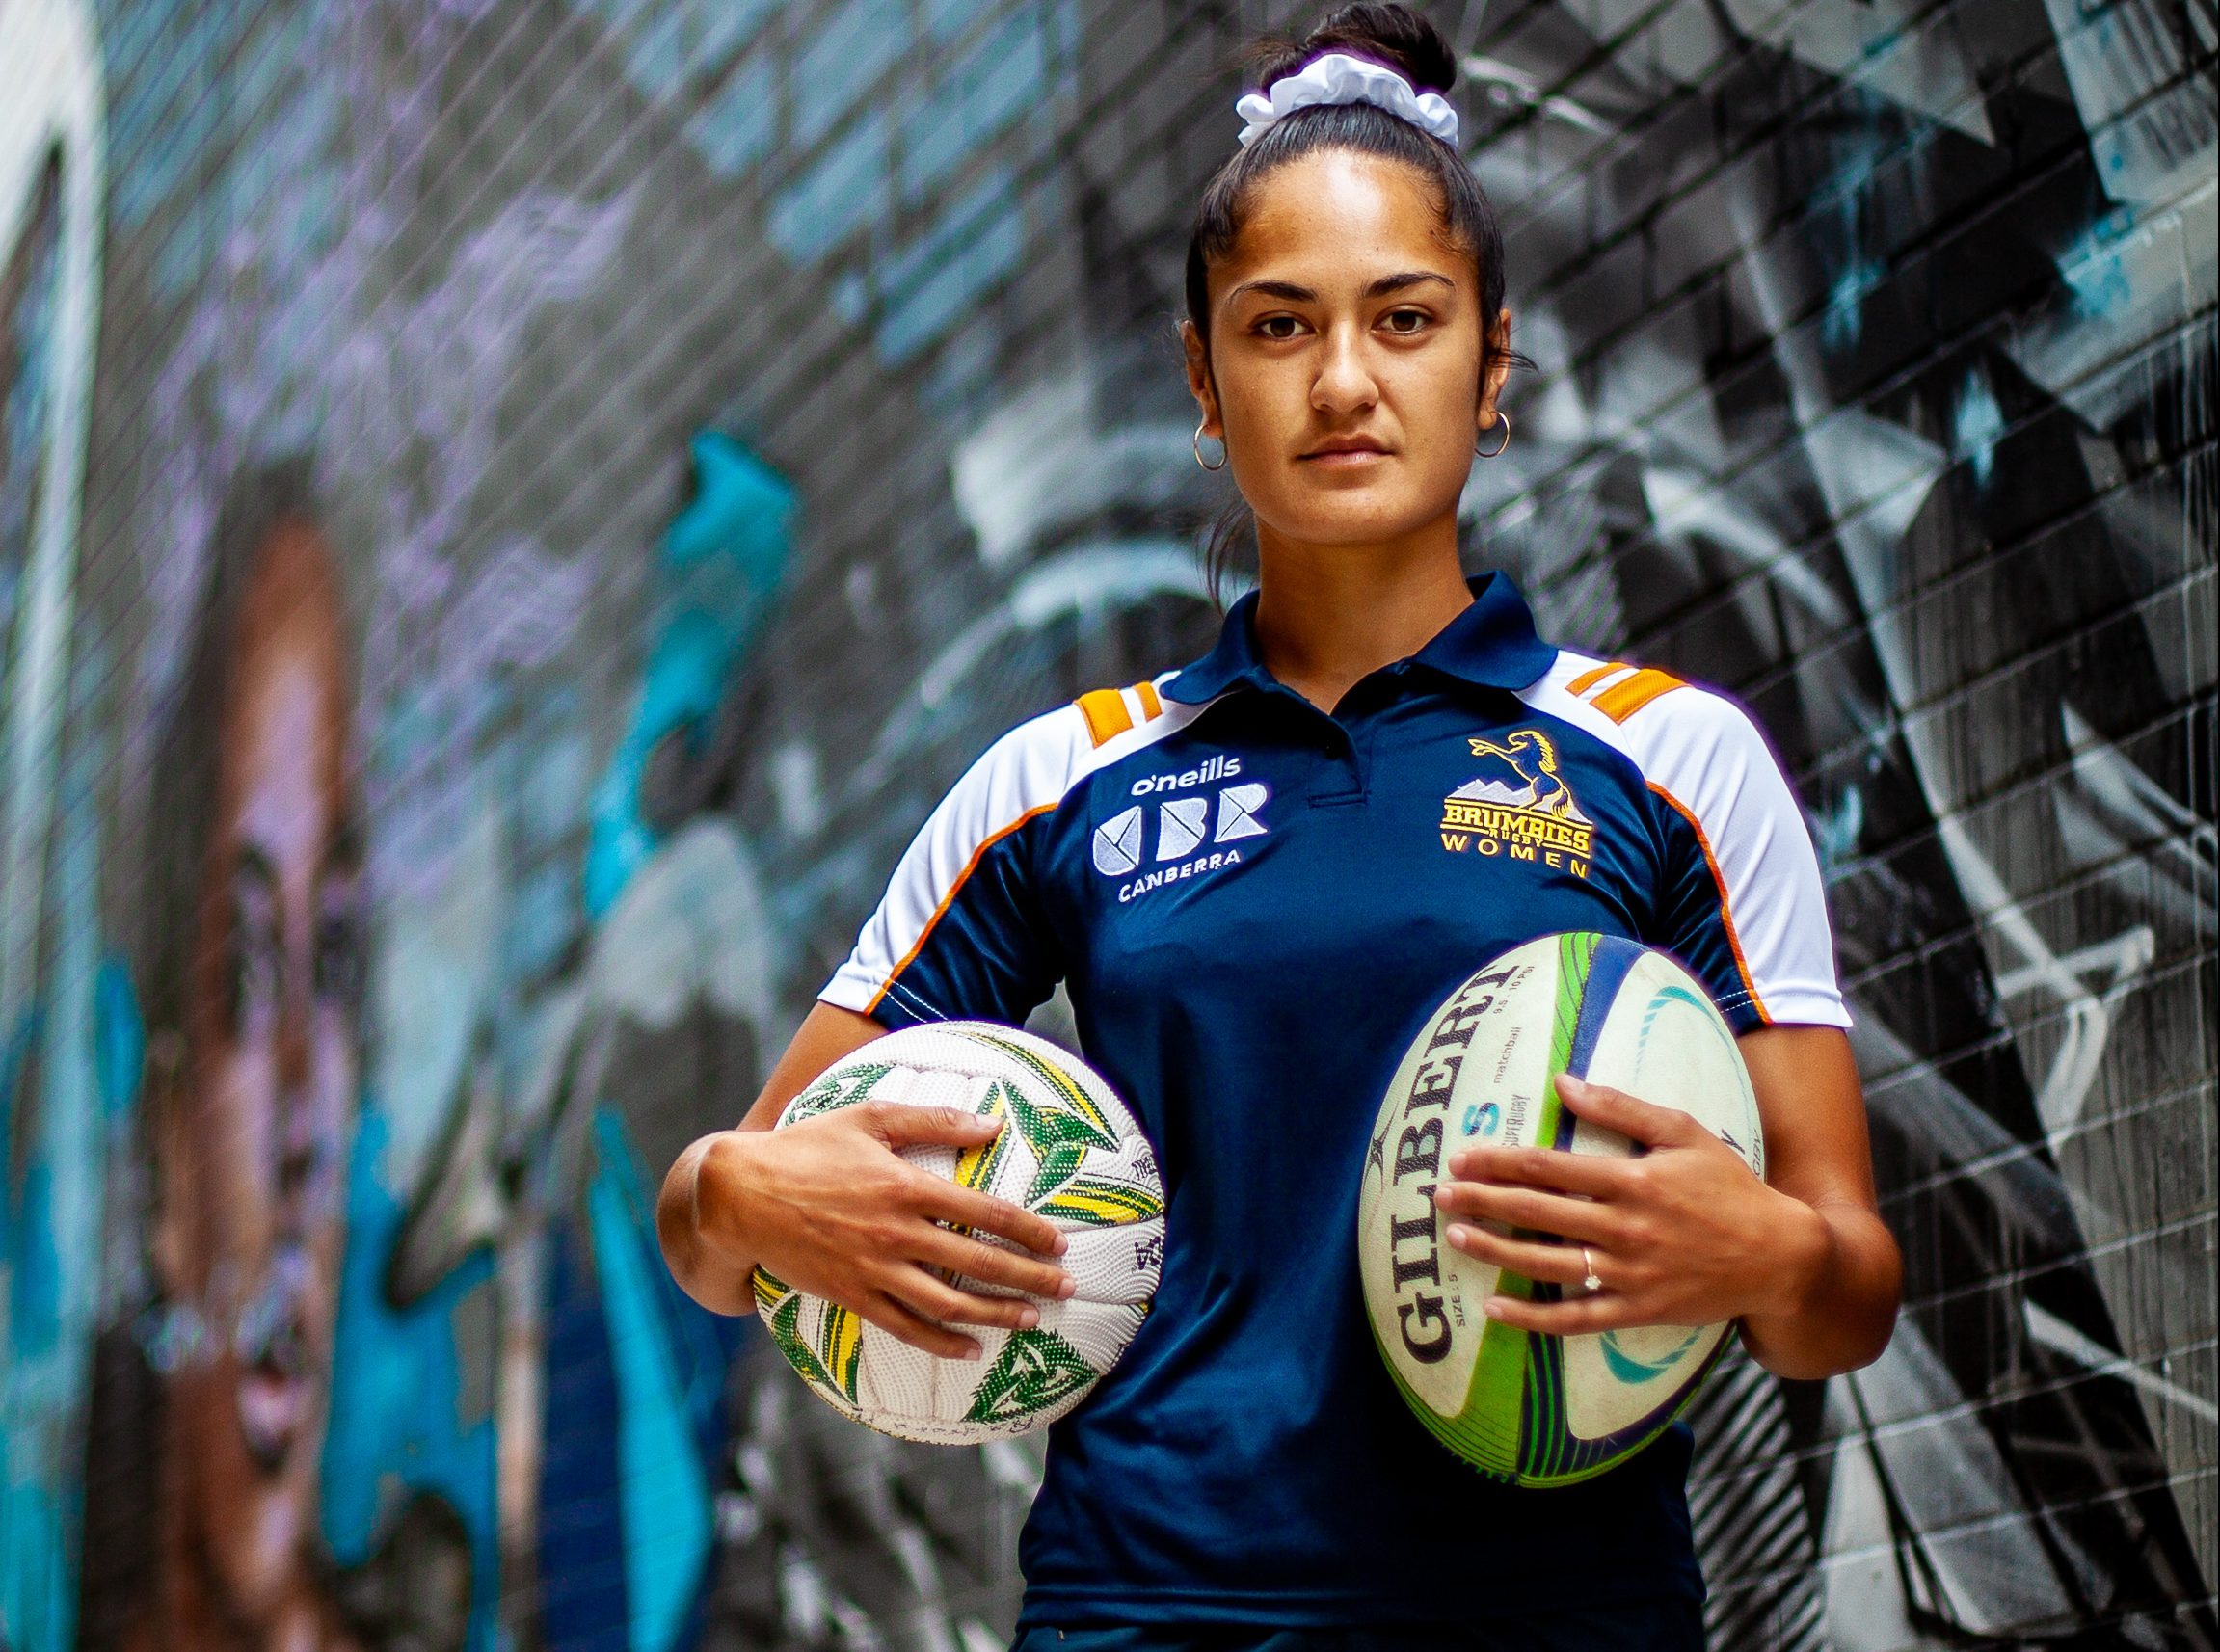 Ngawai Eyles swapping sports to pursue rugby dream in Super W season